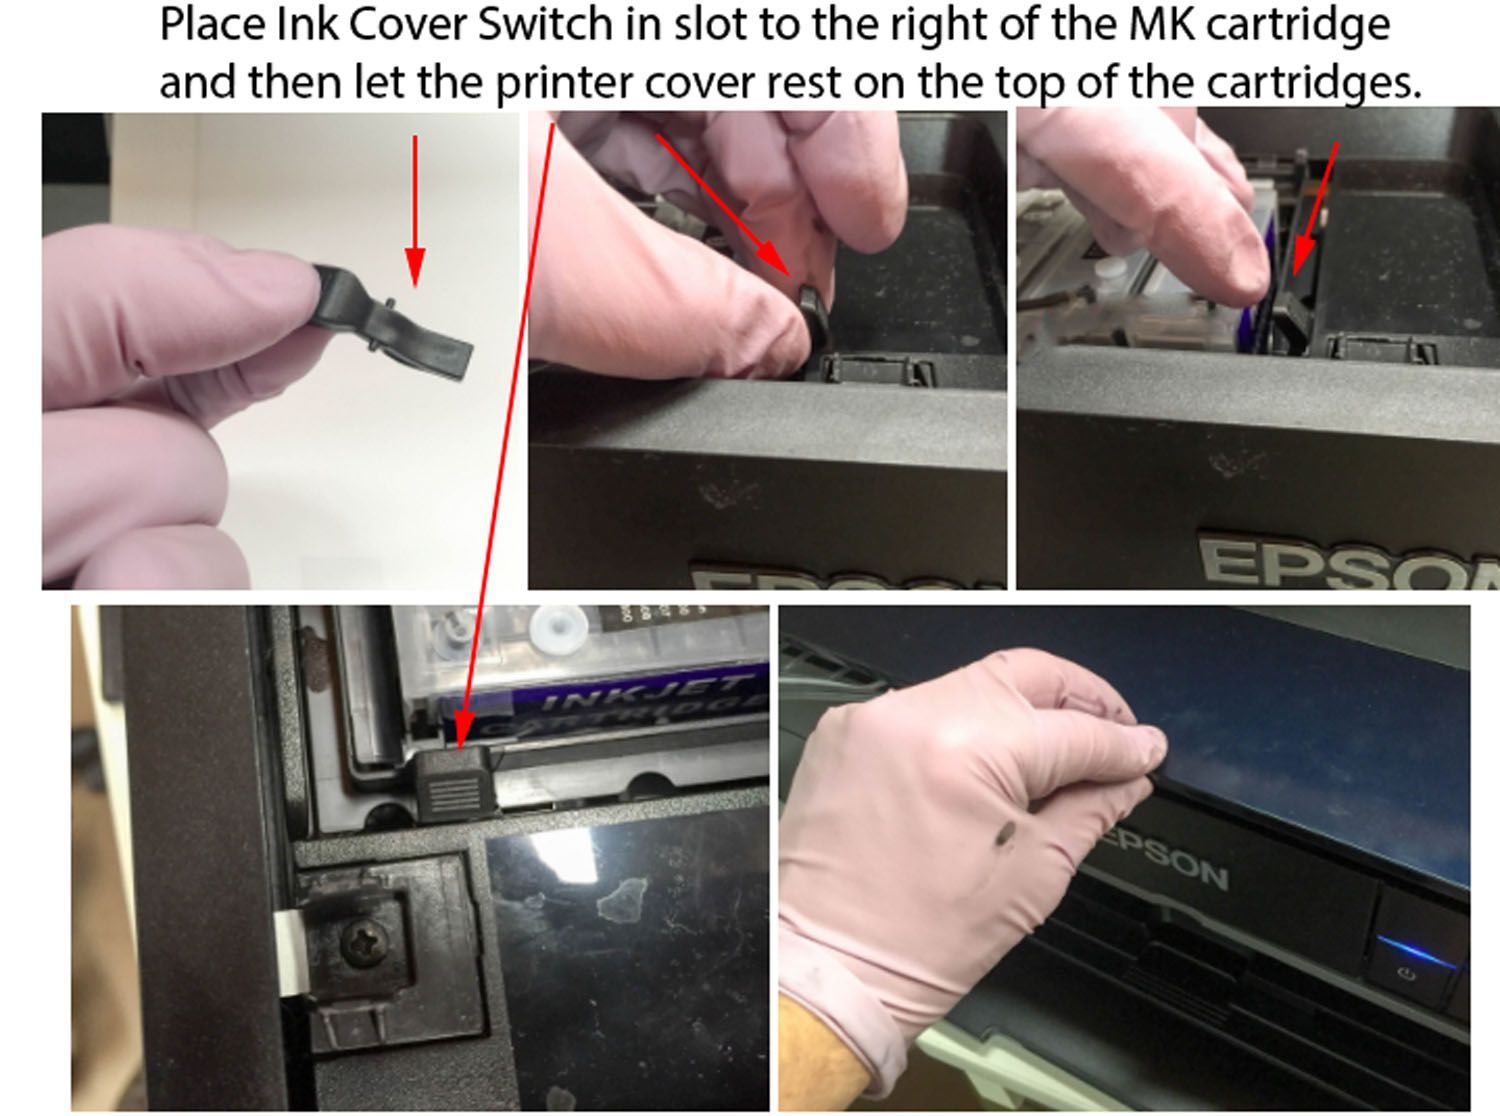 Ink Cover Switch Photo